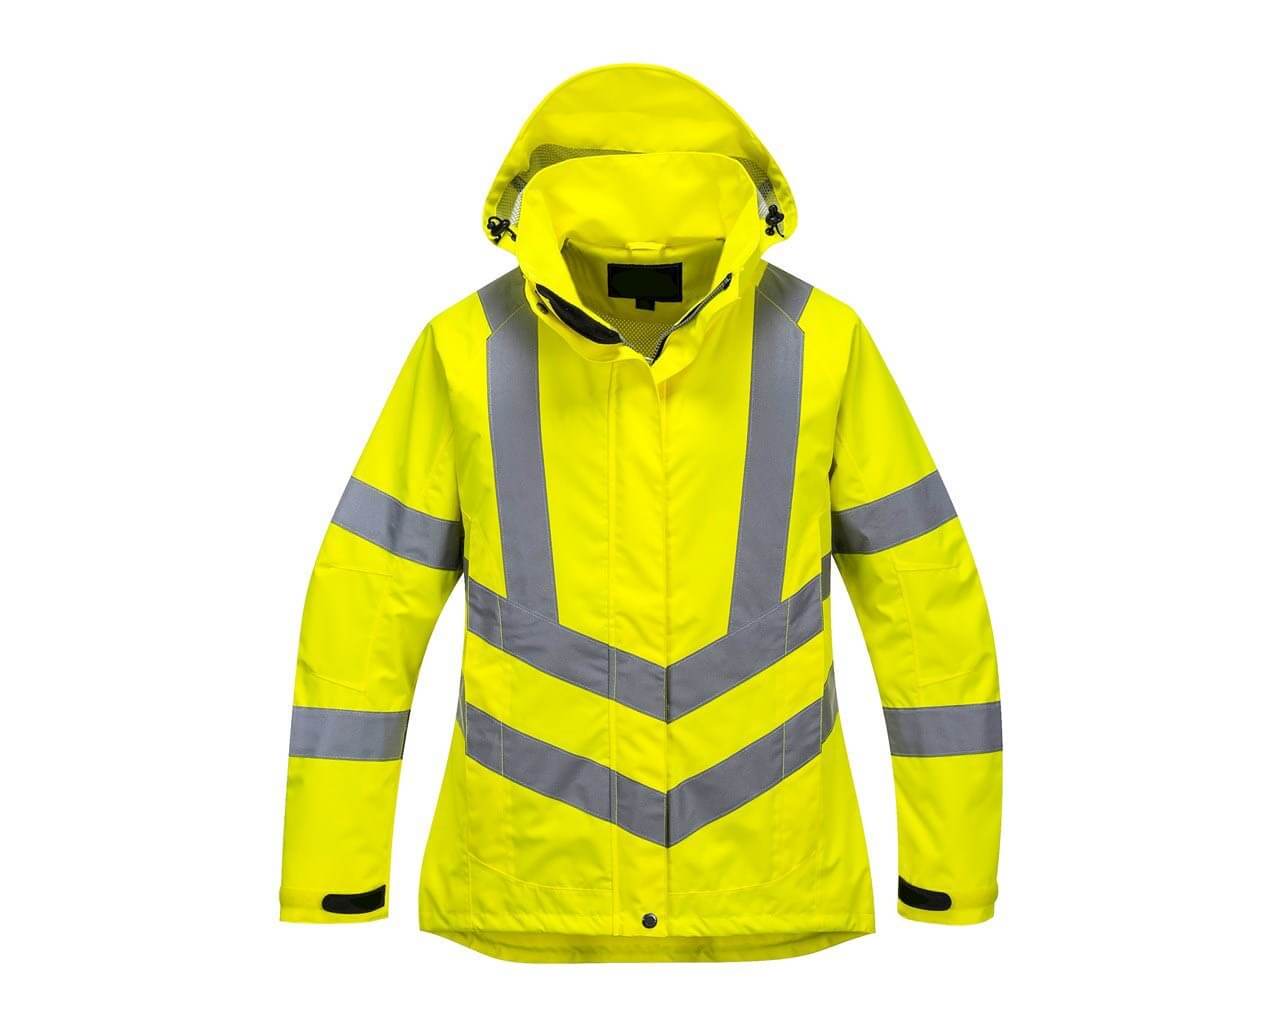 Ladies High Visibility Jacket, PLW70